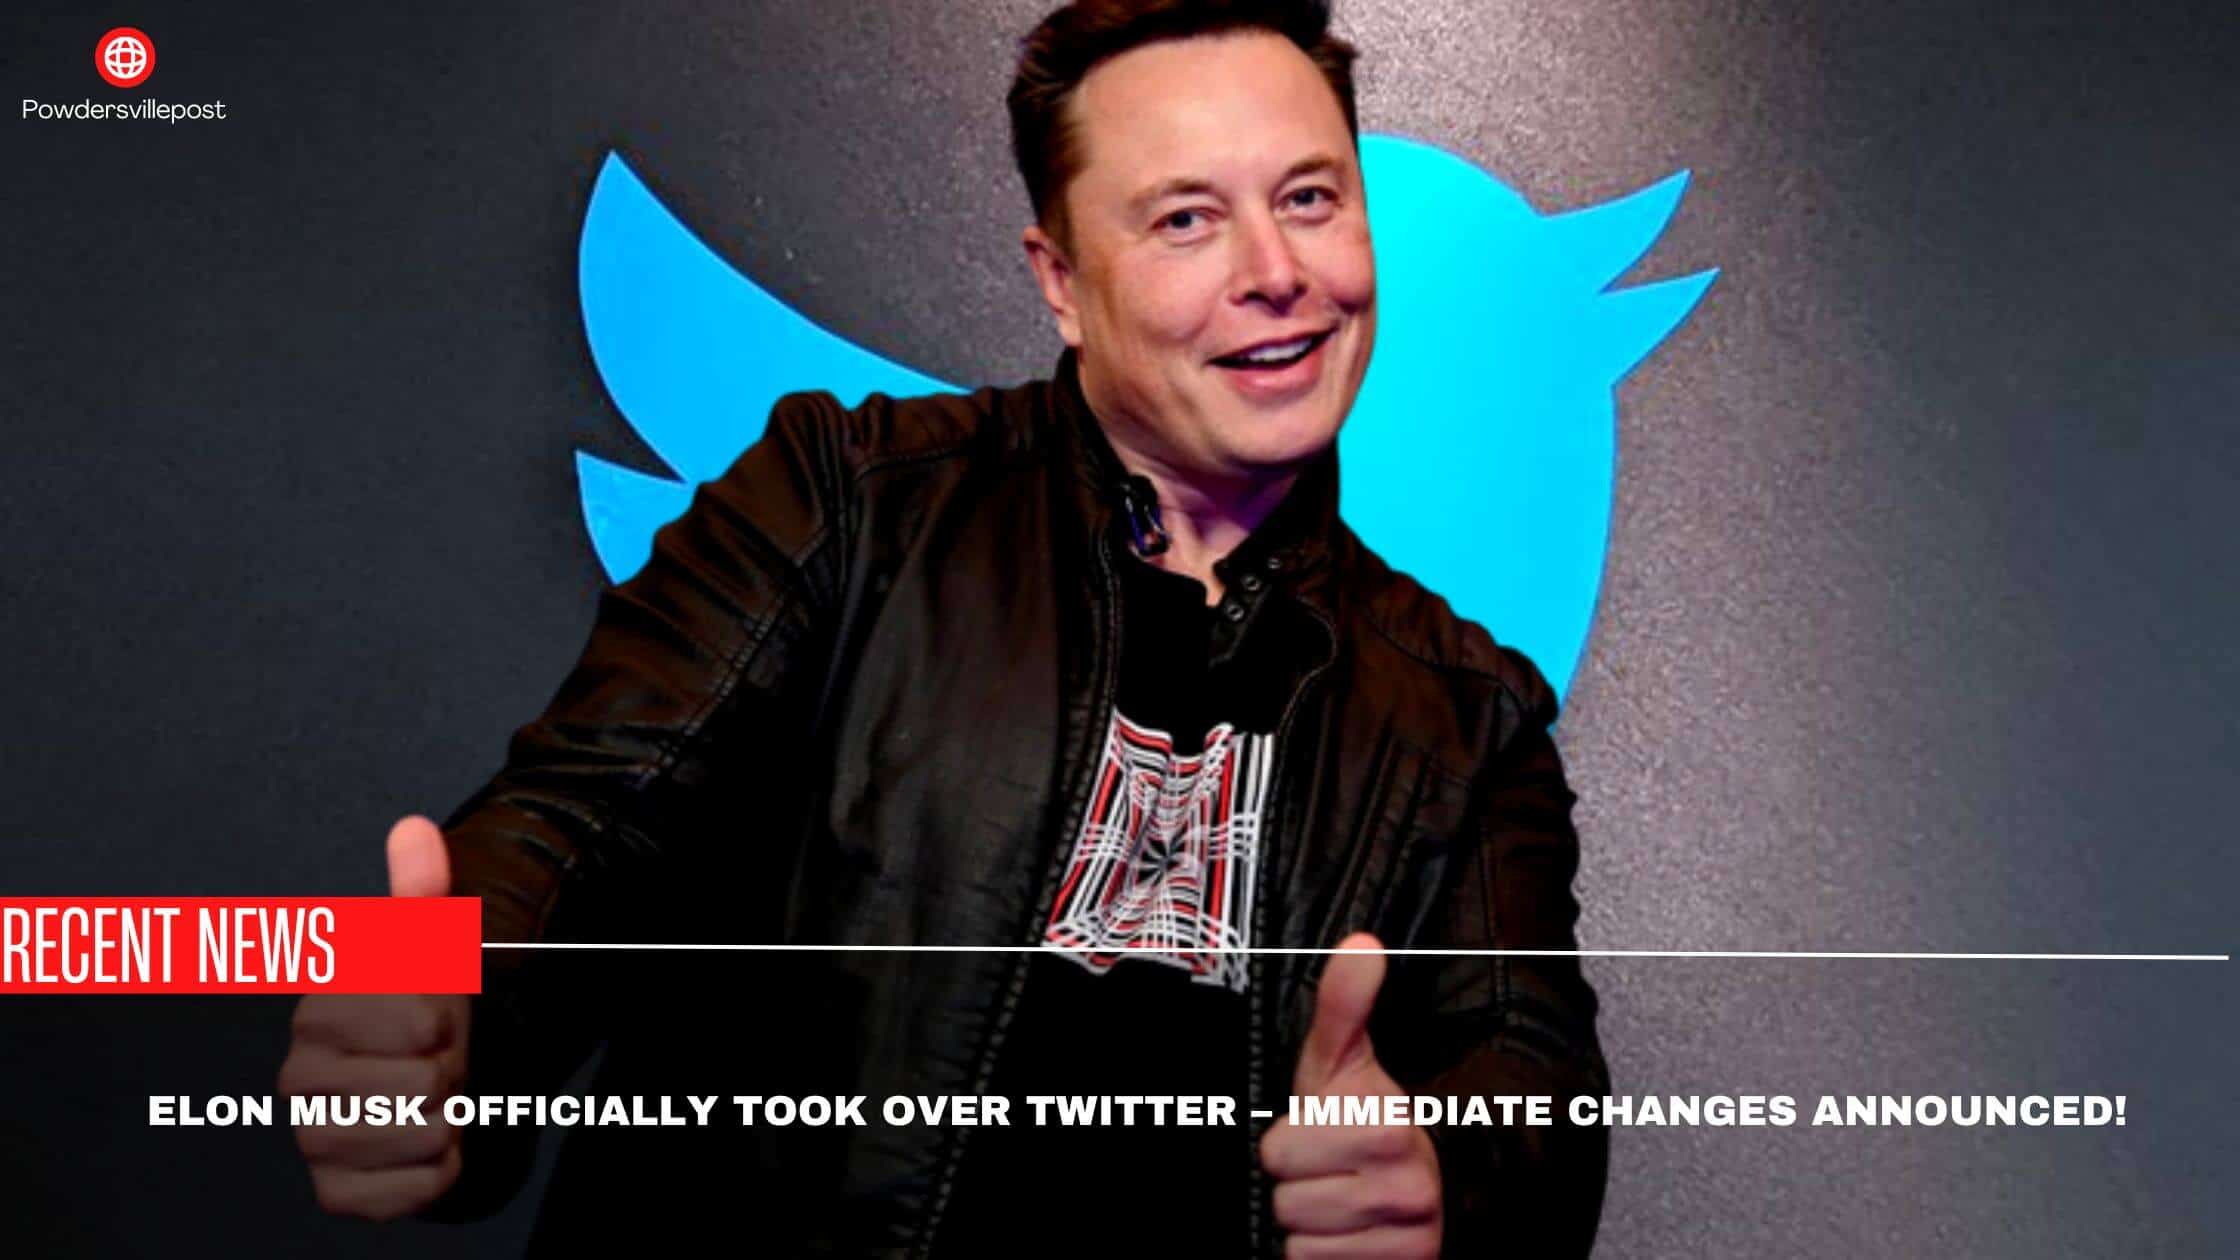 Elon Musk Officially Took Over Twitter – Immediate Changes Announced!